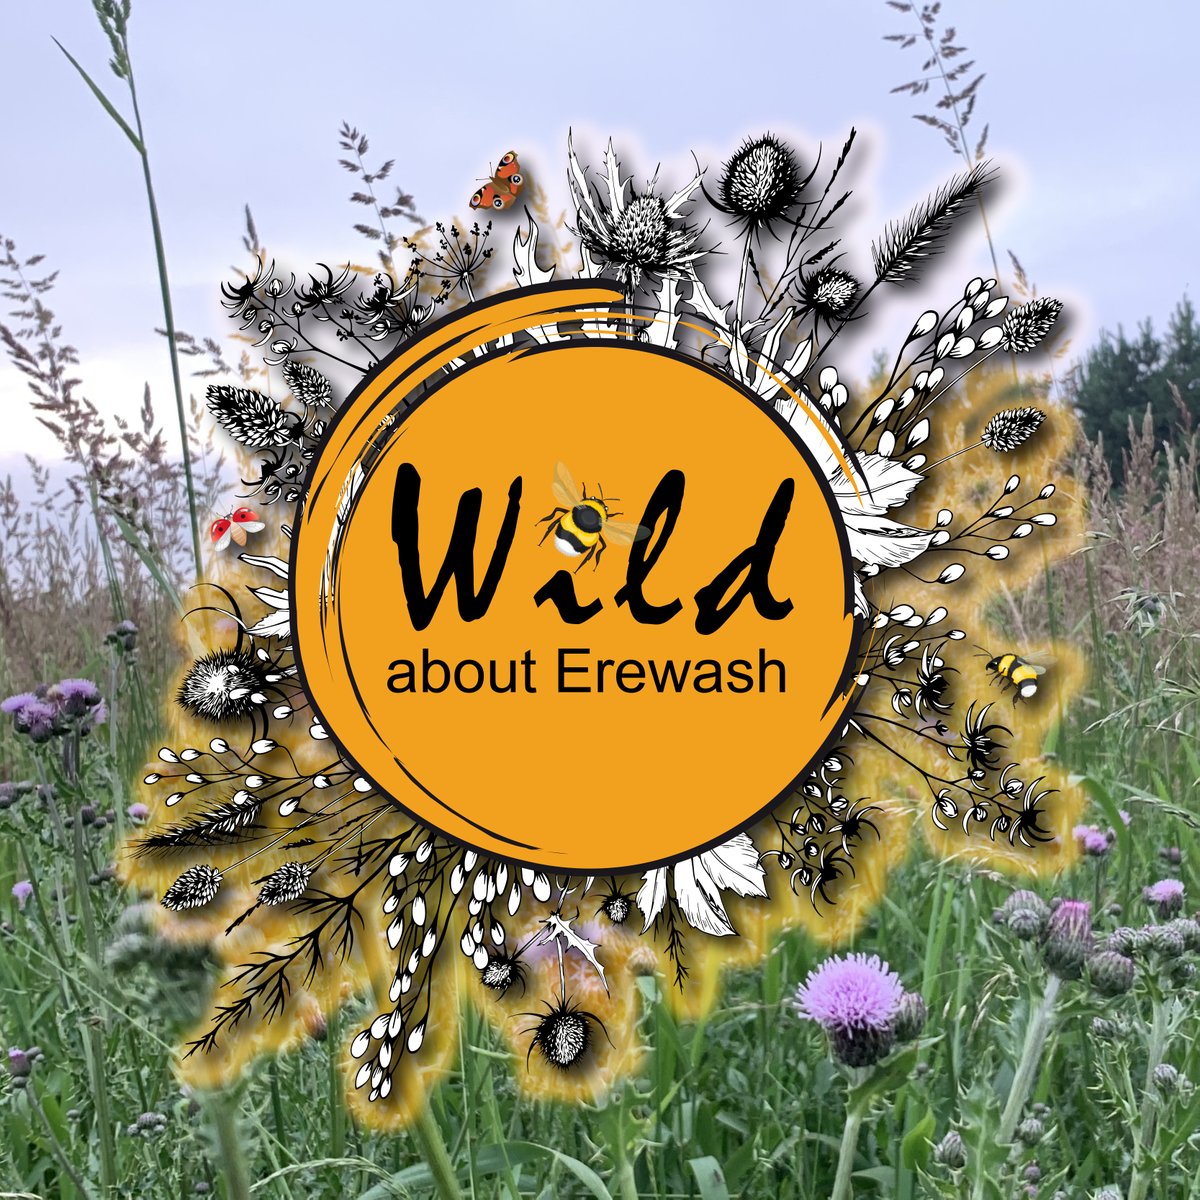 A new campaign by Erewash Borough Council aims to benefit people’s health and wellbeing, improve biodiversity in the borough, and reduce the authority’s carbon footprint across its 100-plus parks and open spaces.

The mission to be more environmentally friendly is called “Wild…